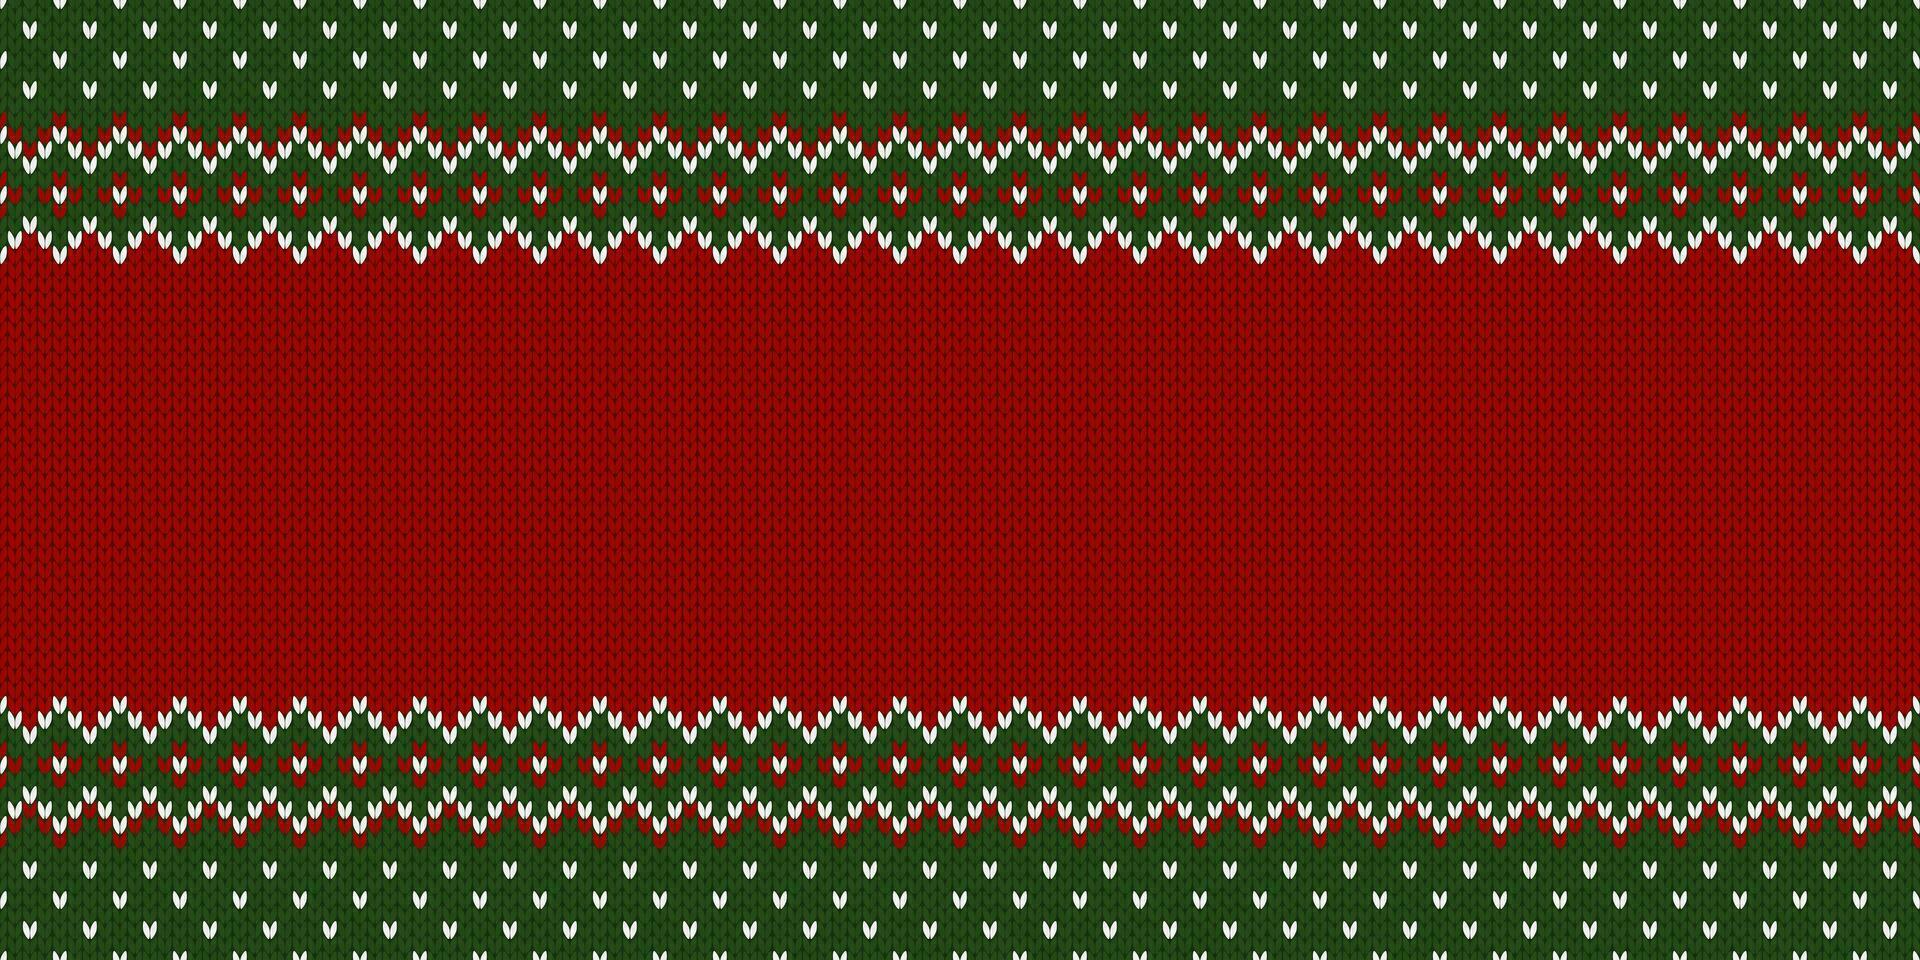 Ugly Christmas Sweater Party. Template with place for text. Knitted pattern. vector